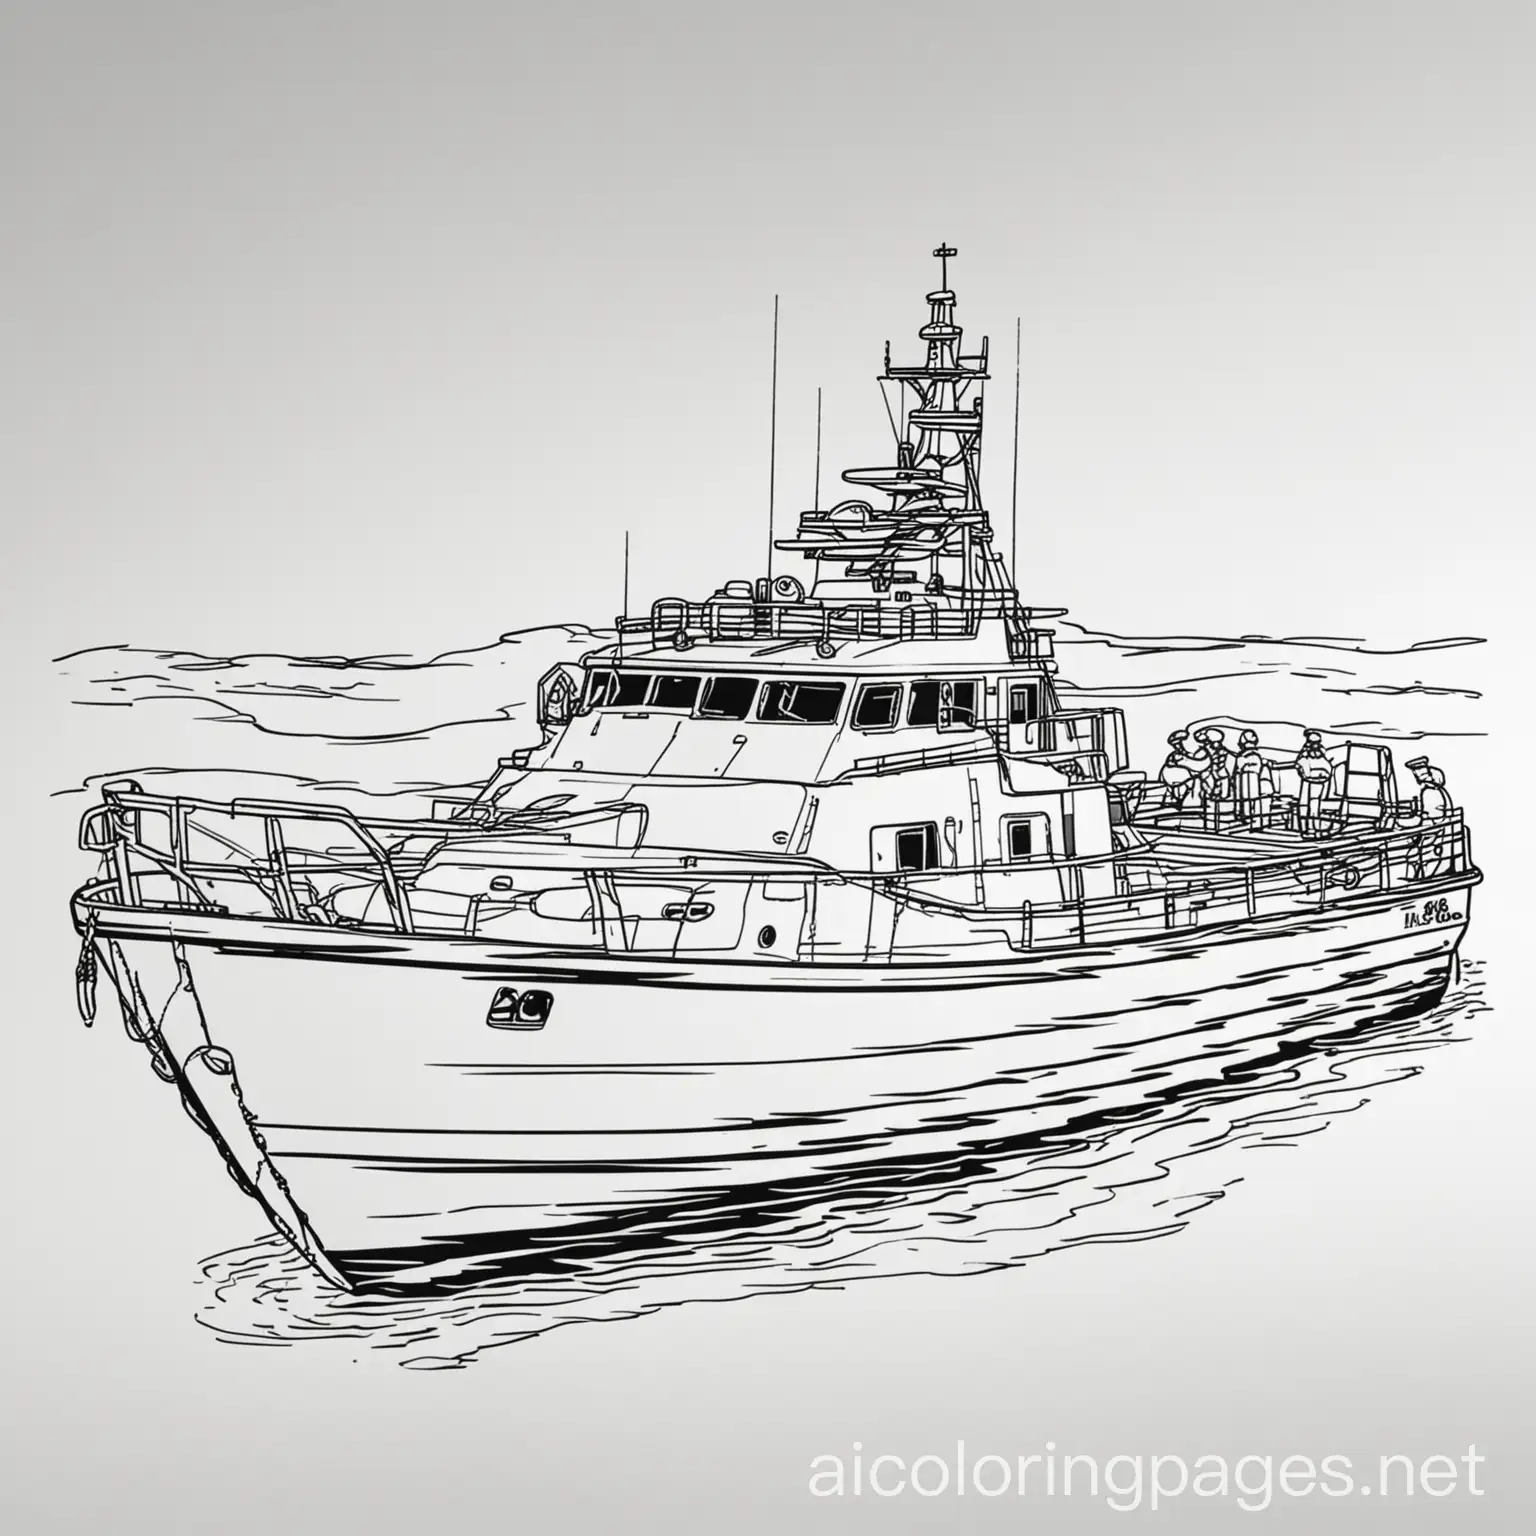 military boat , Coloring Page, black and white, line art, white background, Simplicity, Ample White Space. The background of the coloring page is plain white to make it easy for young children to color within the lines. The outlines of all the subjects are easy to distinguish, making it simple for kids to color without too much difficulty